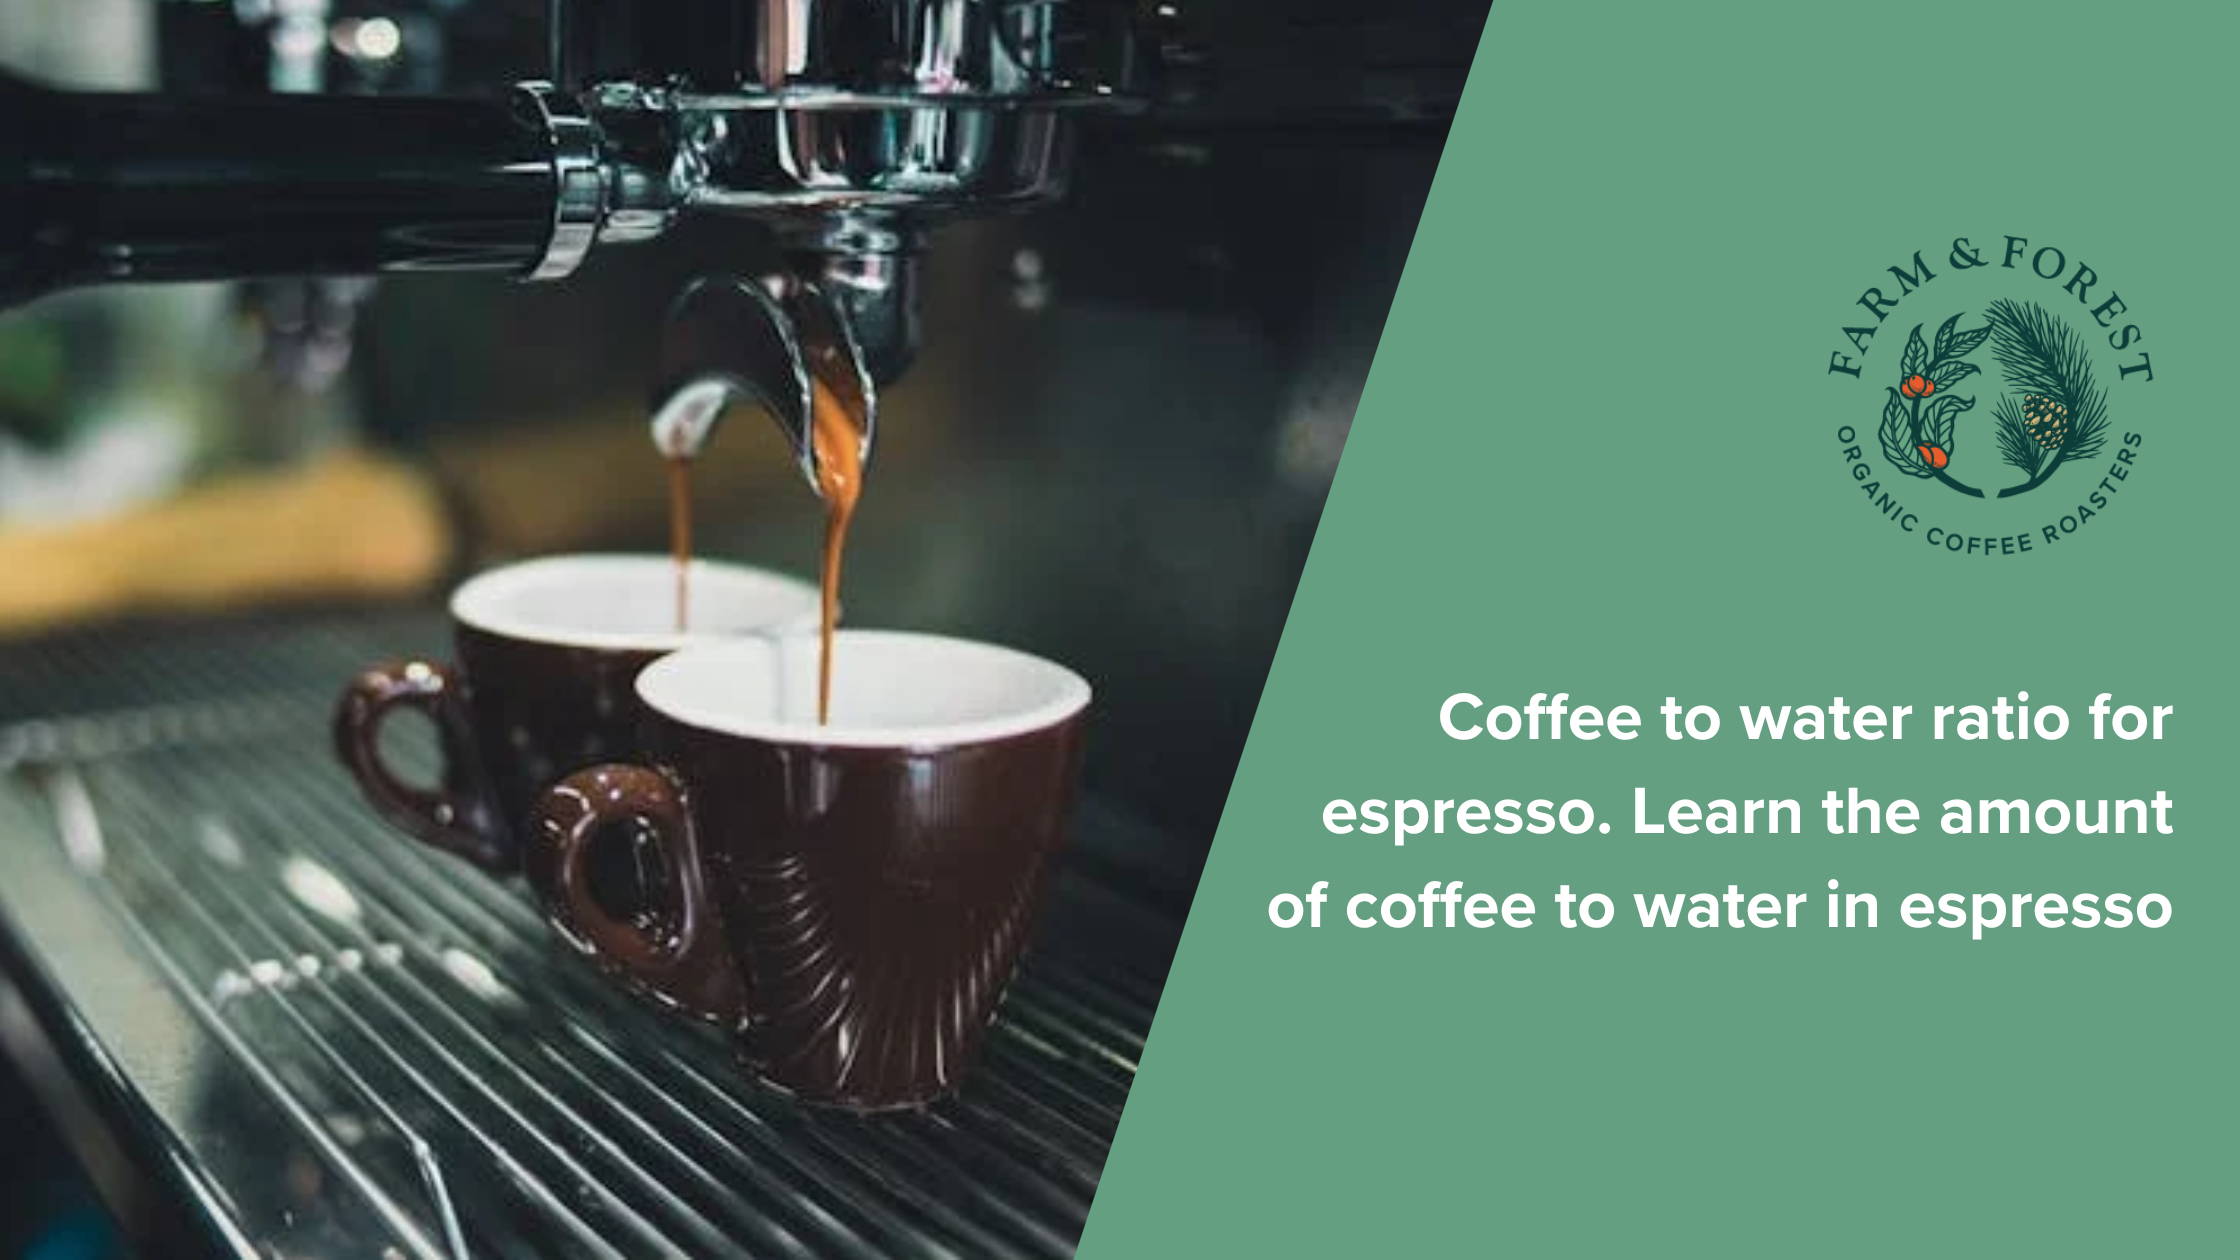 Coffee to water ratio for espresso. Learn the amount of coffee to water in espresso